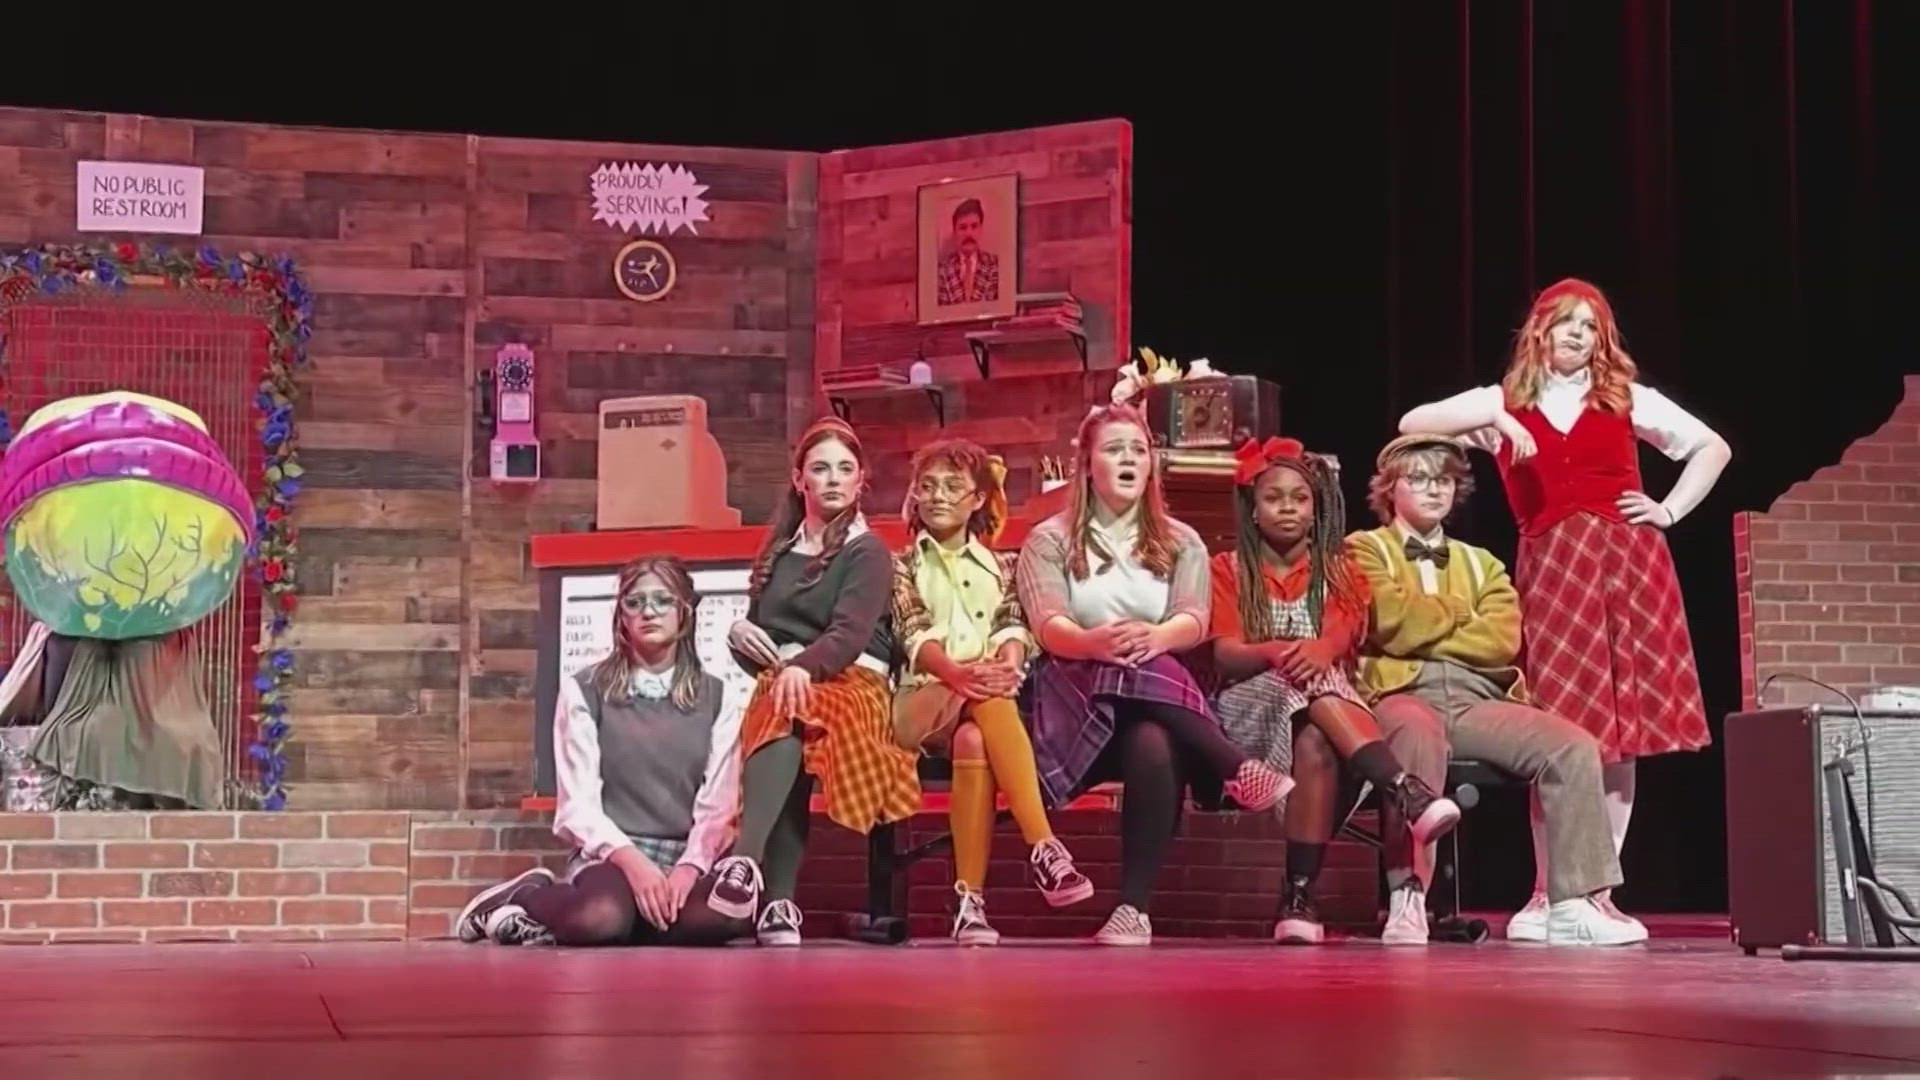 The investigation into a Sherman High School production of “Oklahoma!” started after a transgender student was initially removed from a role in the show.